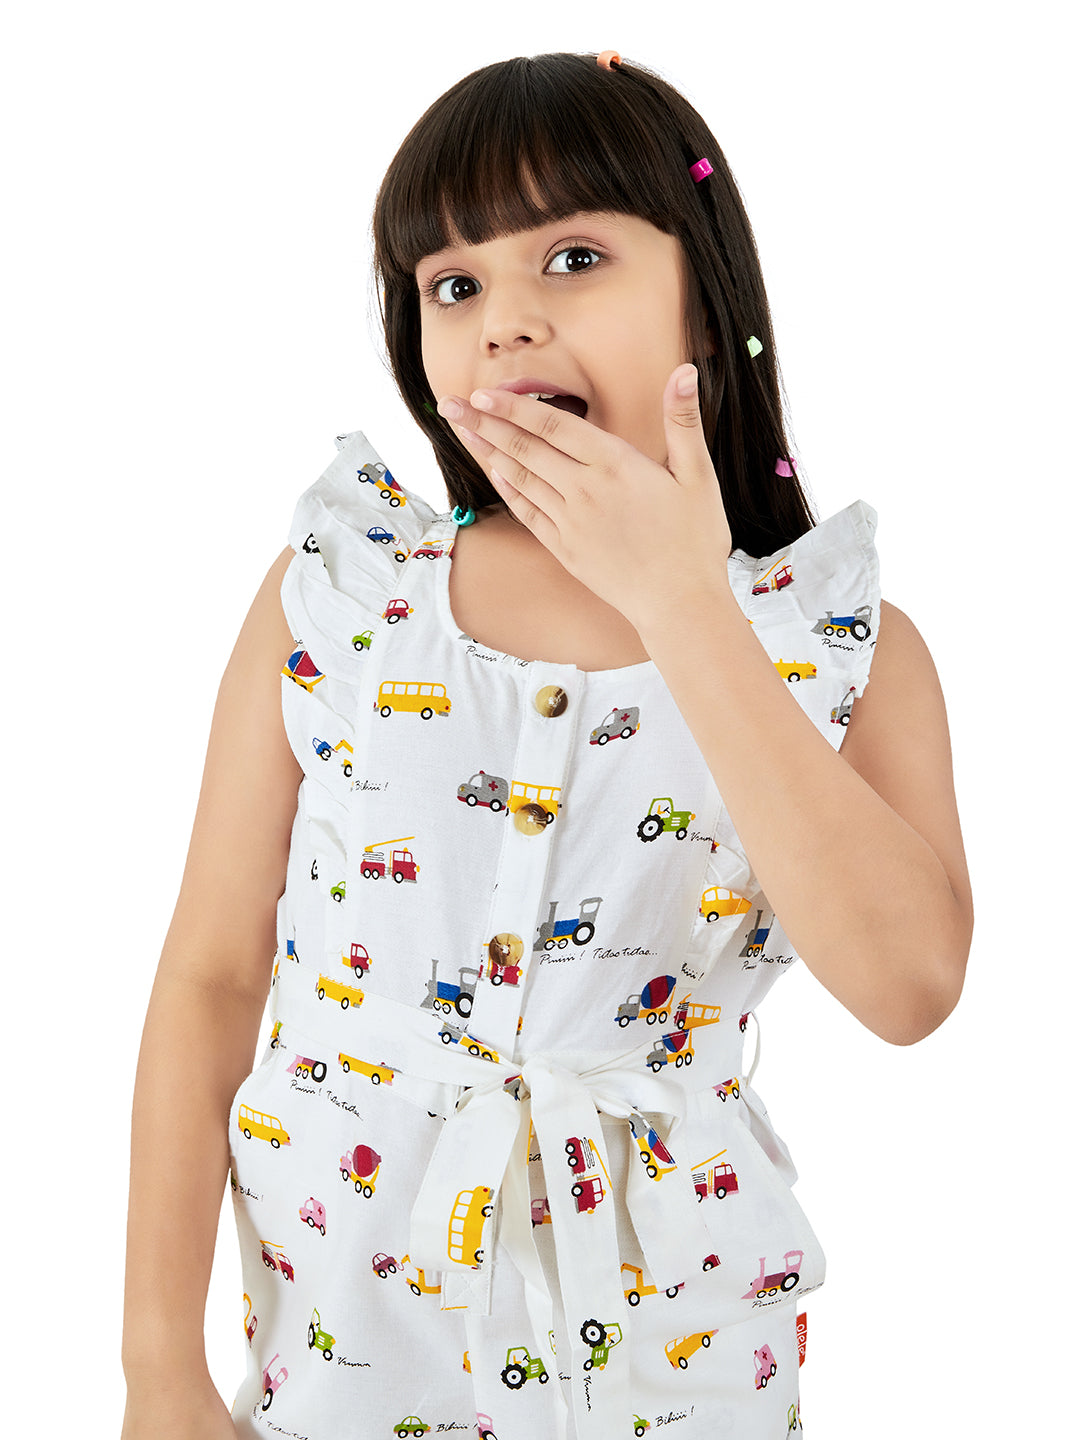 Olele® Girls May Romper - Toys Printed Cotton